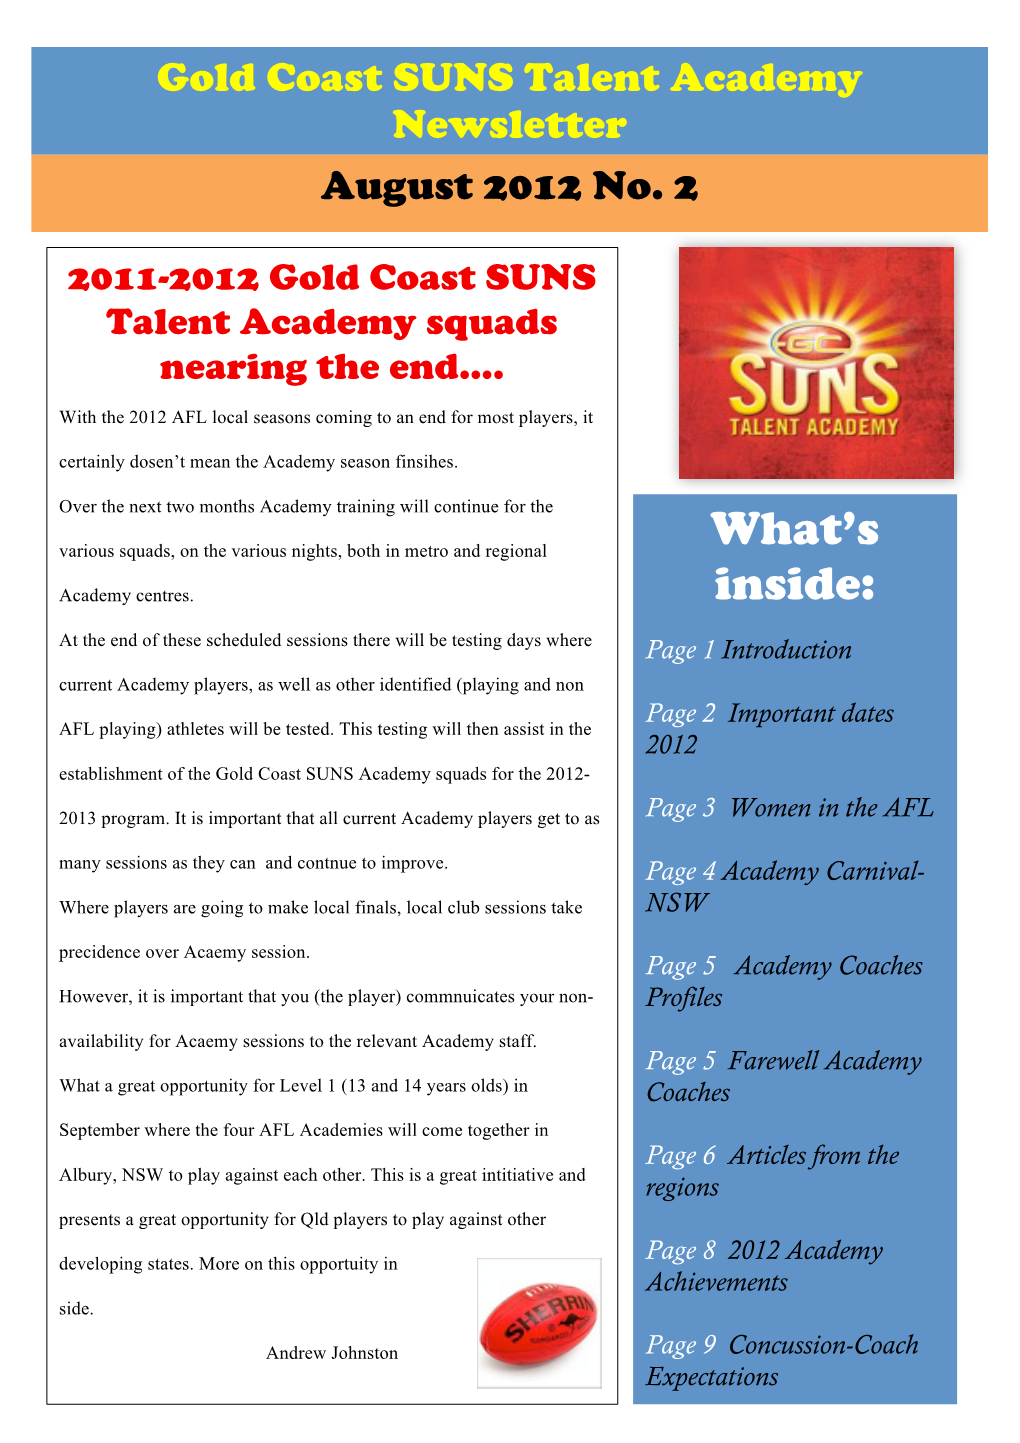 2011-2012 Gold Coast SUNS Talent Academy Squads Nearing the End…